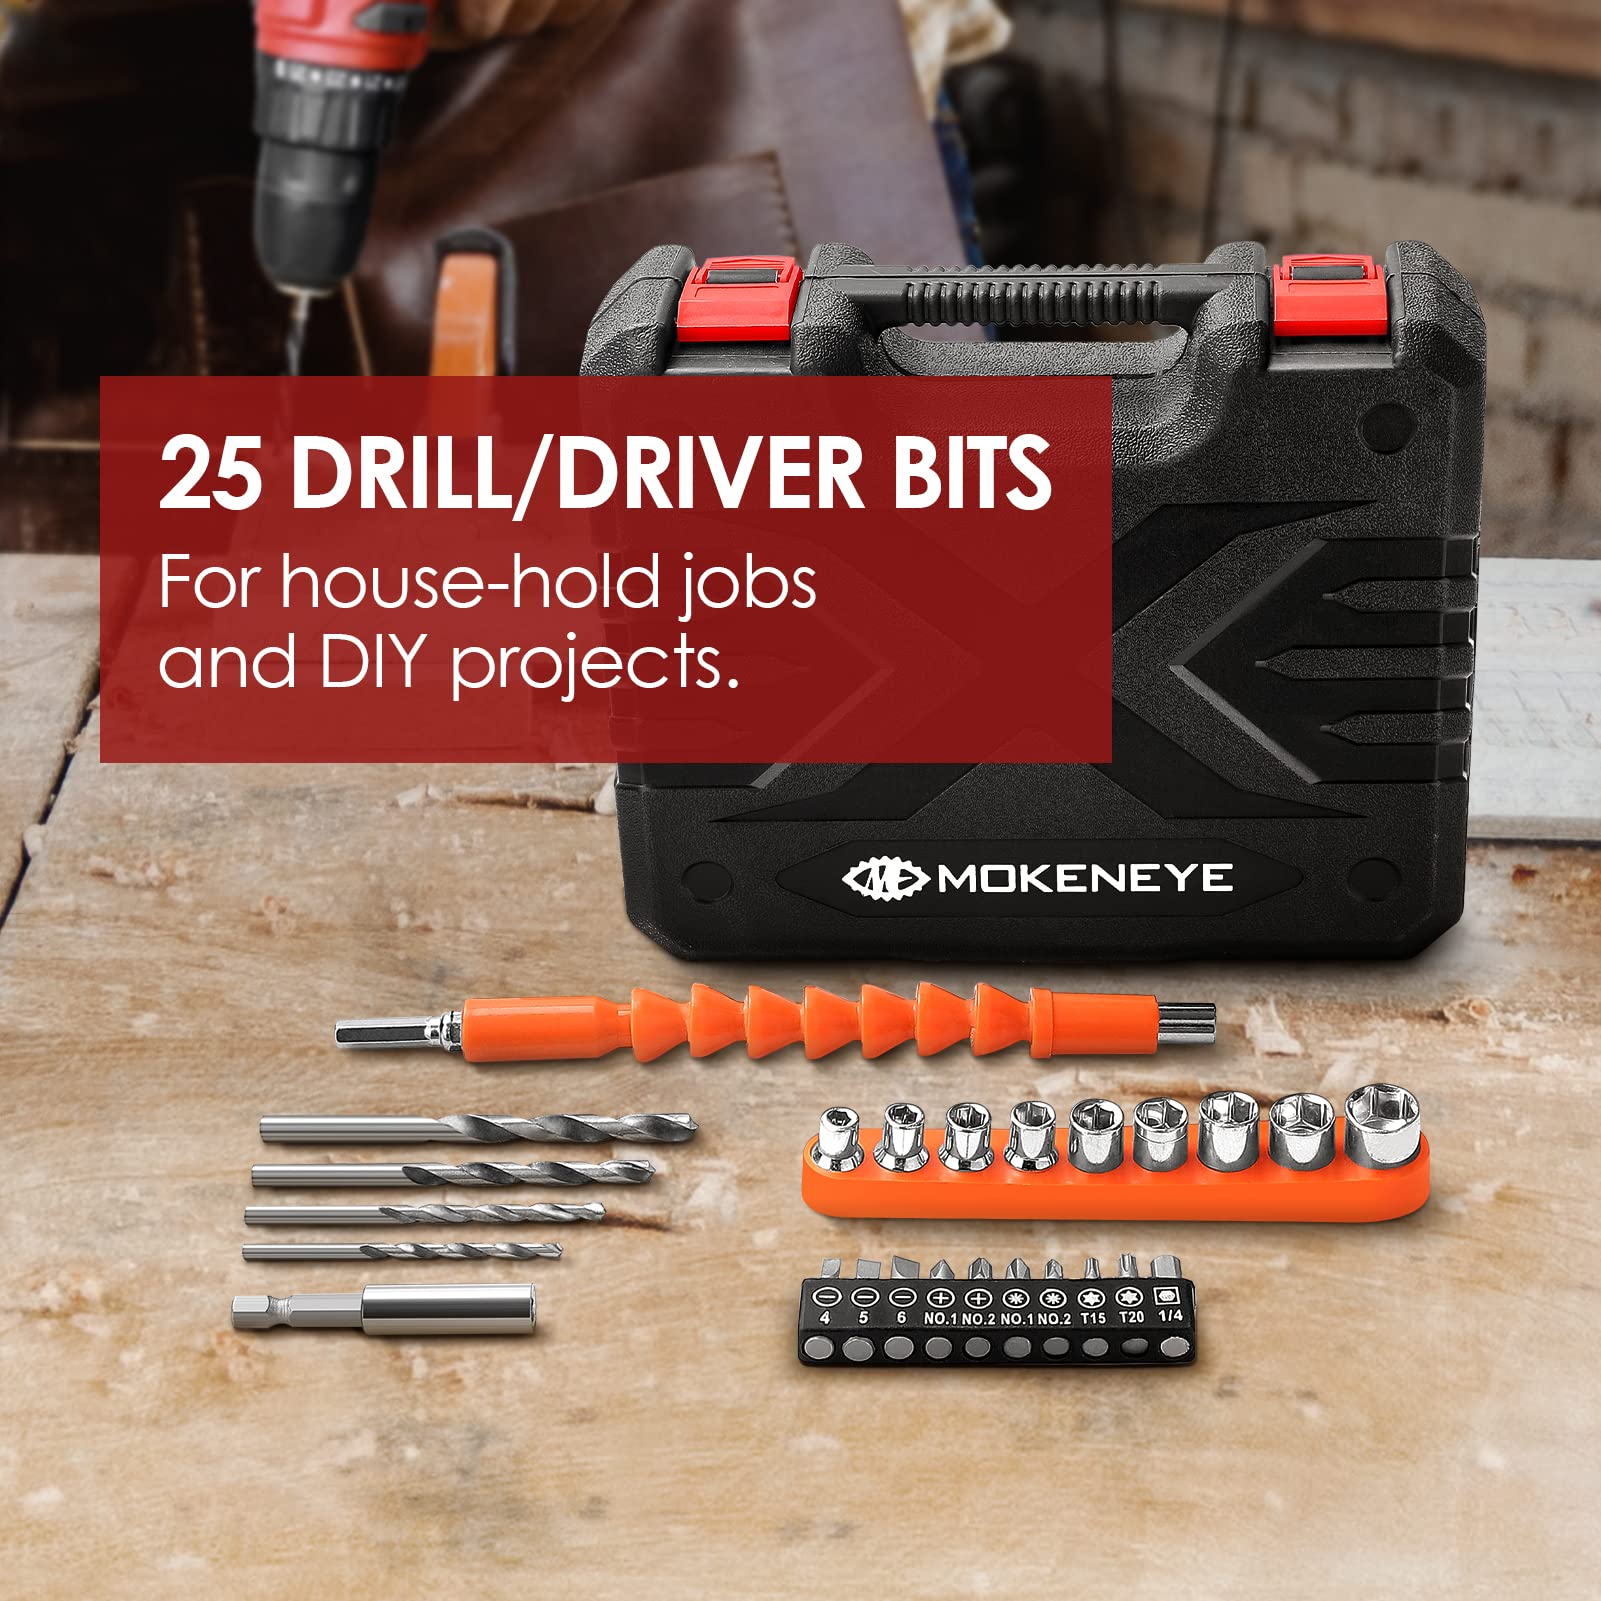 MOKENEYE 20V Cordless Drill Driver Kit, Power Drill with 20V Lithium-Ion Battery, 2-Variable Speed, 25+1 Position, 320In-lbs Torque, 3/8” Keyless Chuck, Built-in LED Light